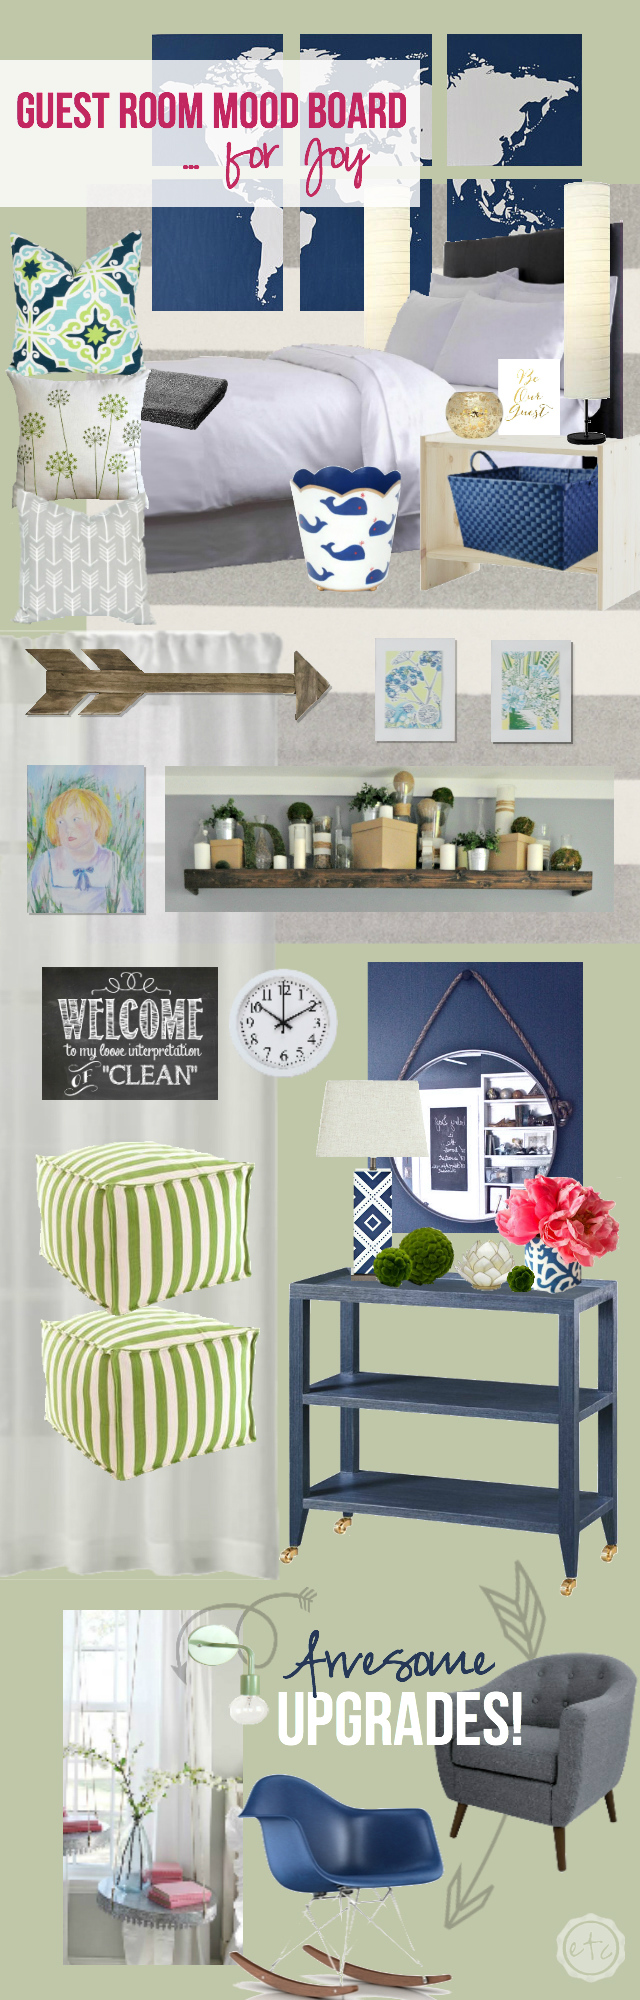 Guest Room Mood Board... for Joy! with Happily Ever After, Etc.